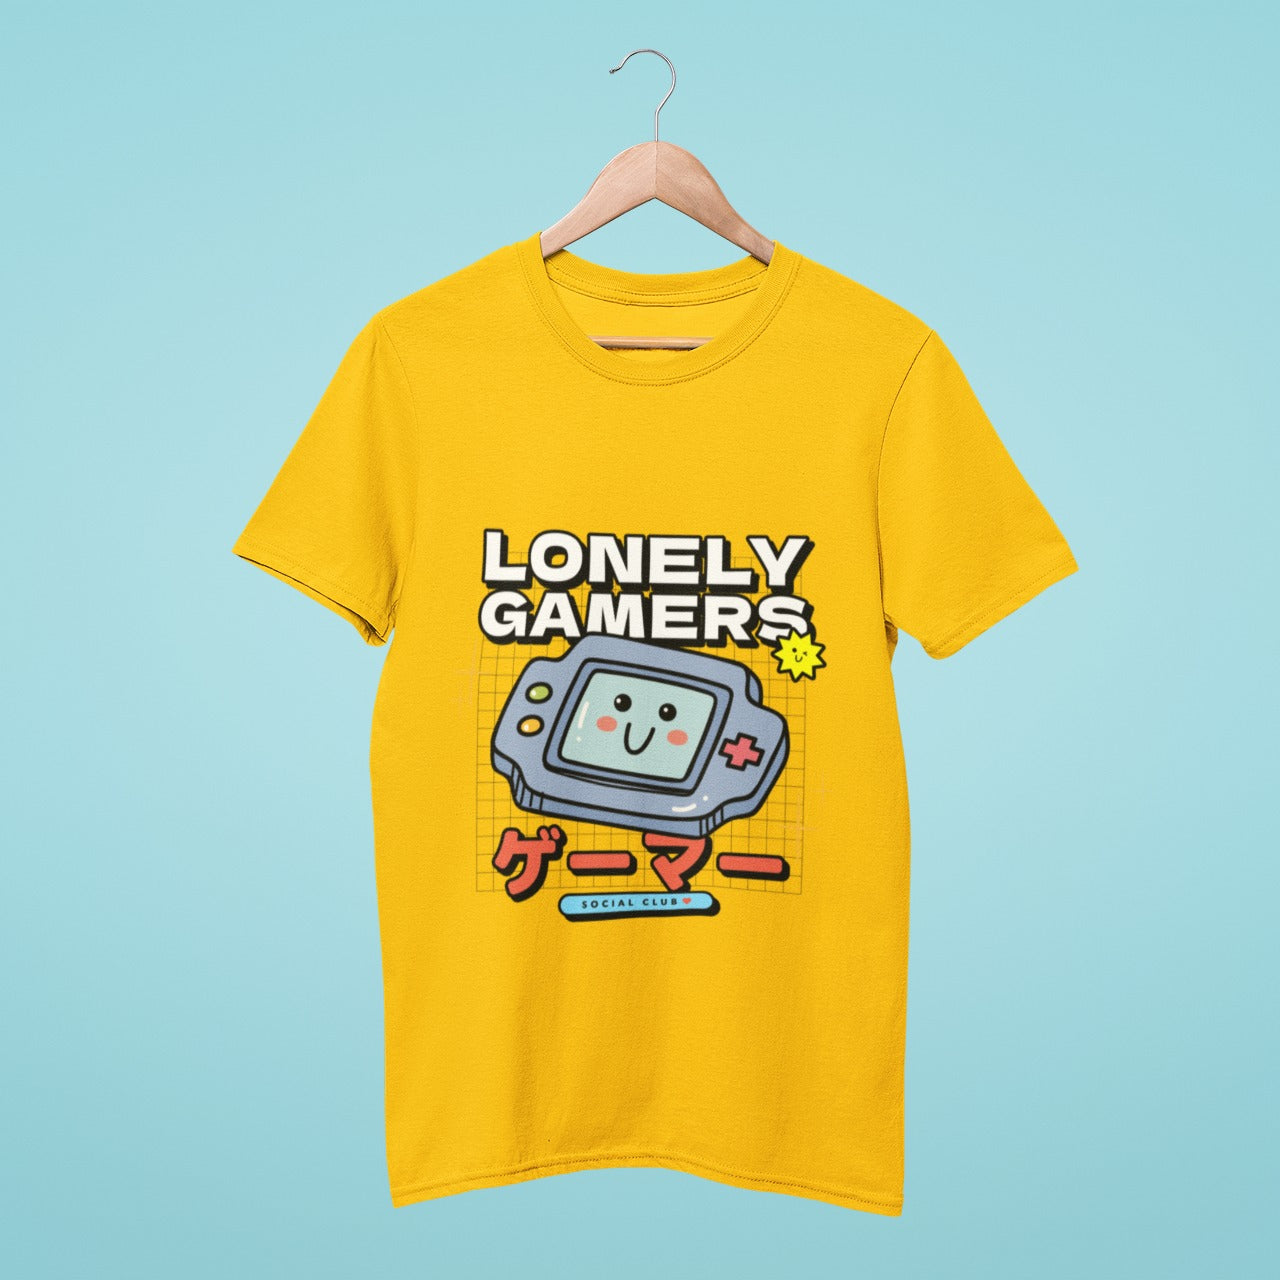 Join the Lonely Gamers Social Club with this yellow tee featuring a cute smiling console design and the slogan 'Lonely Gamers Social Club' - the perfect shirt for gamers who enjoy their own company.